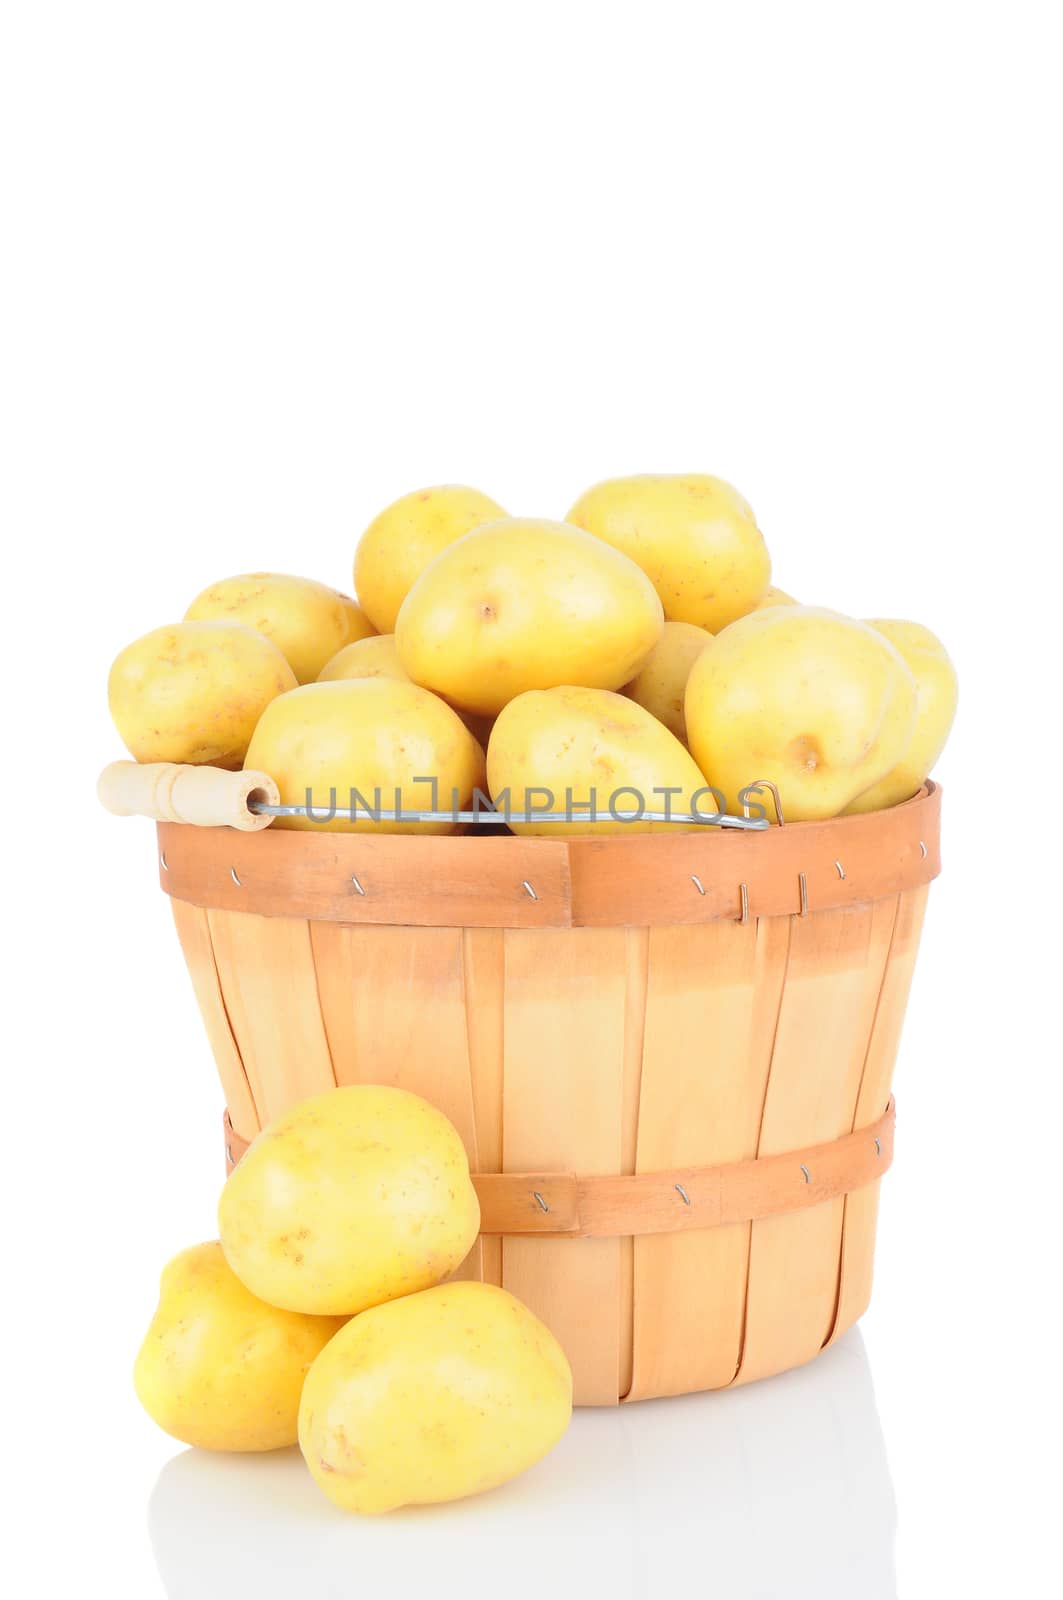 A basket full of white potatoes over a white background with reflection.  Vertical Format.